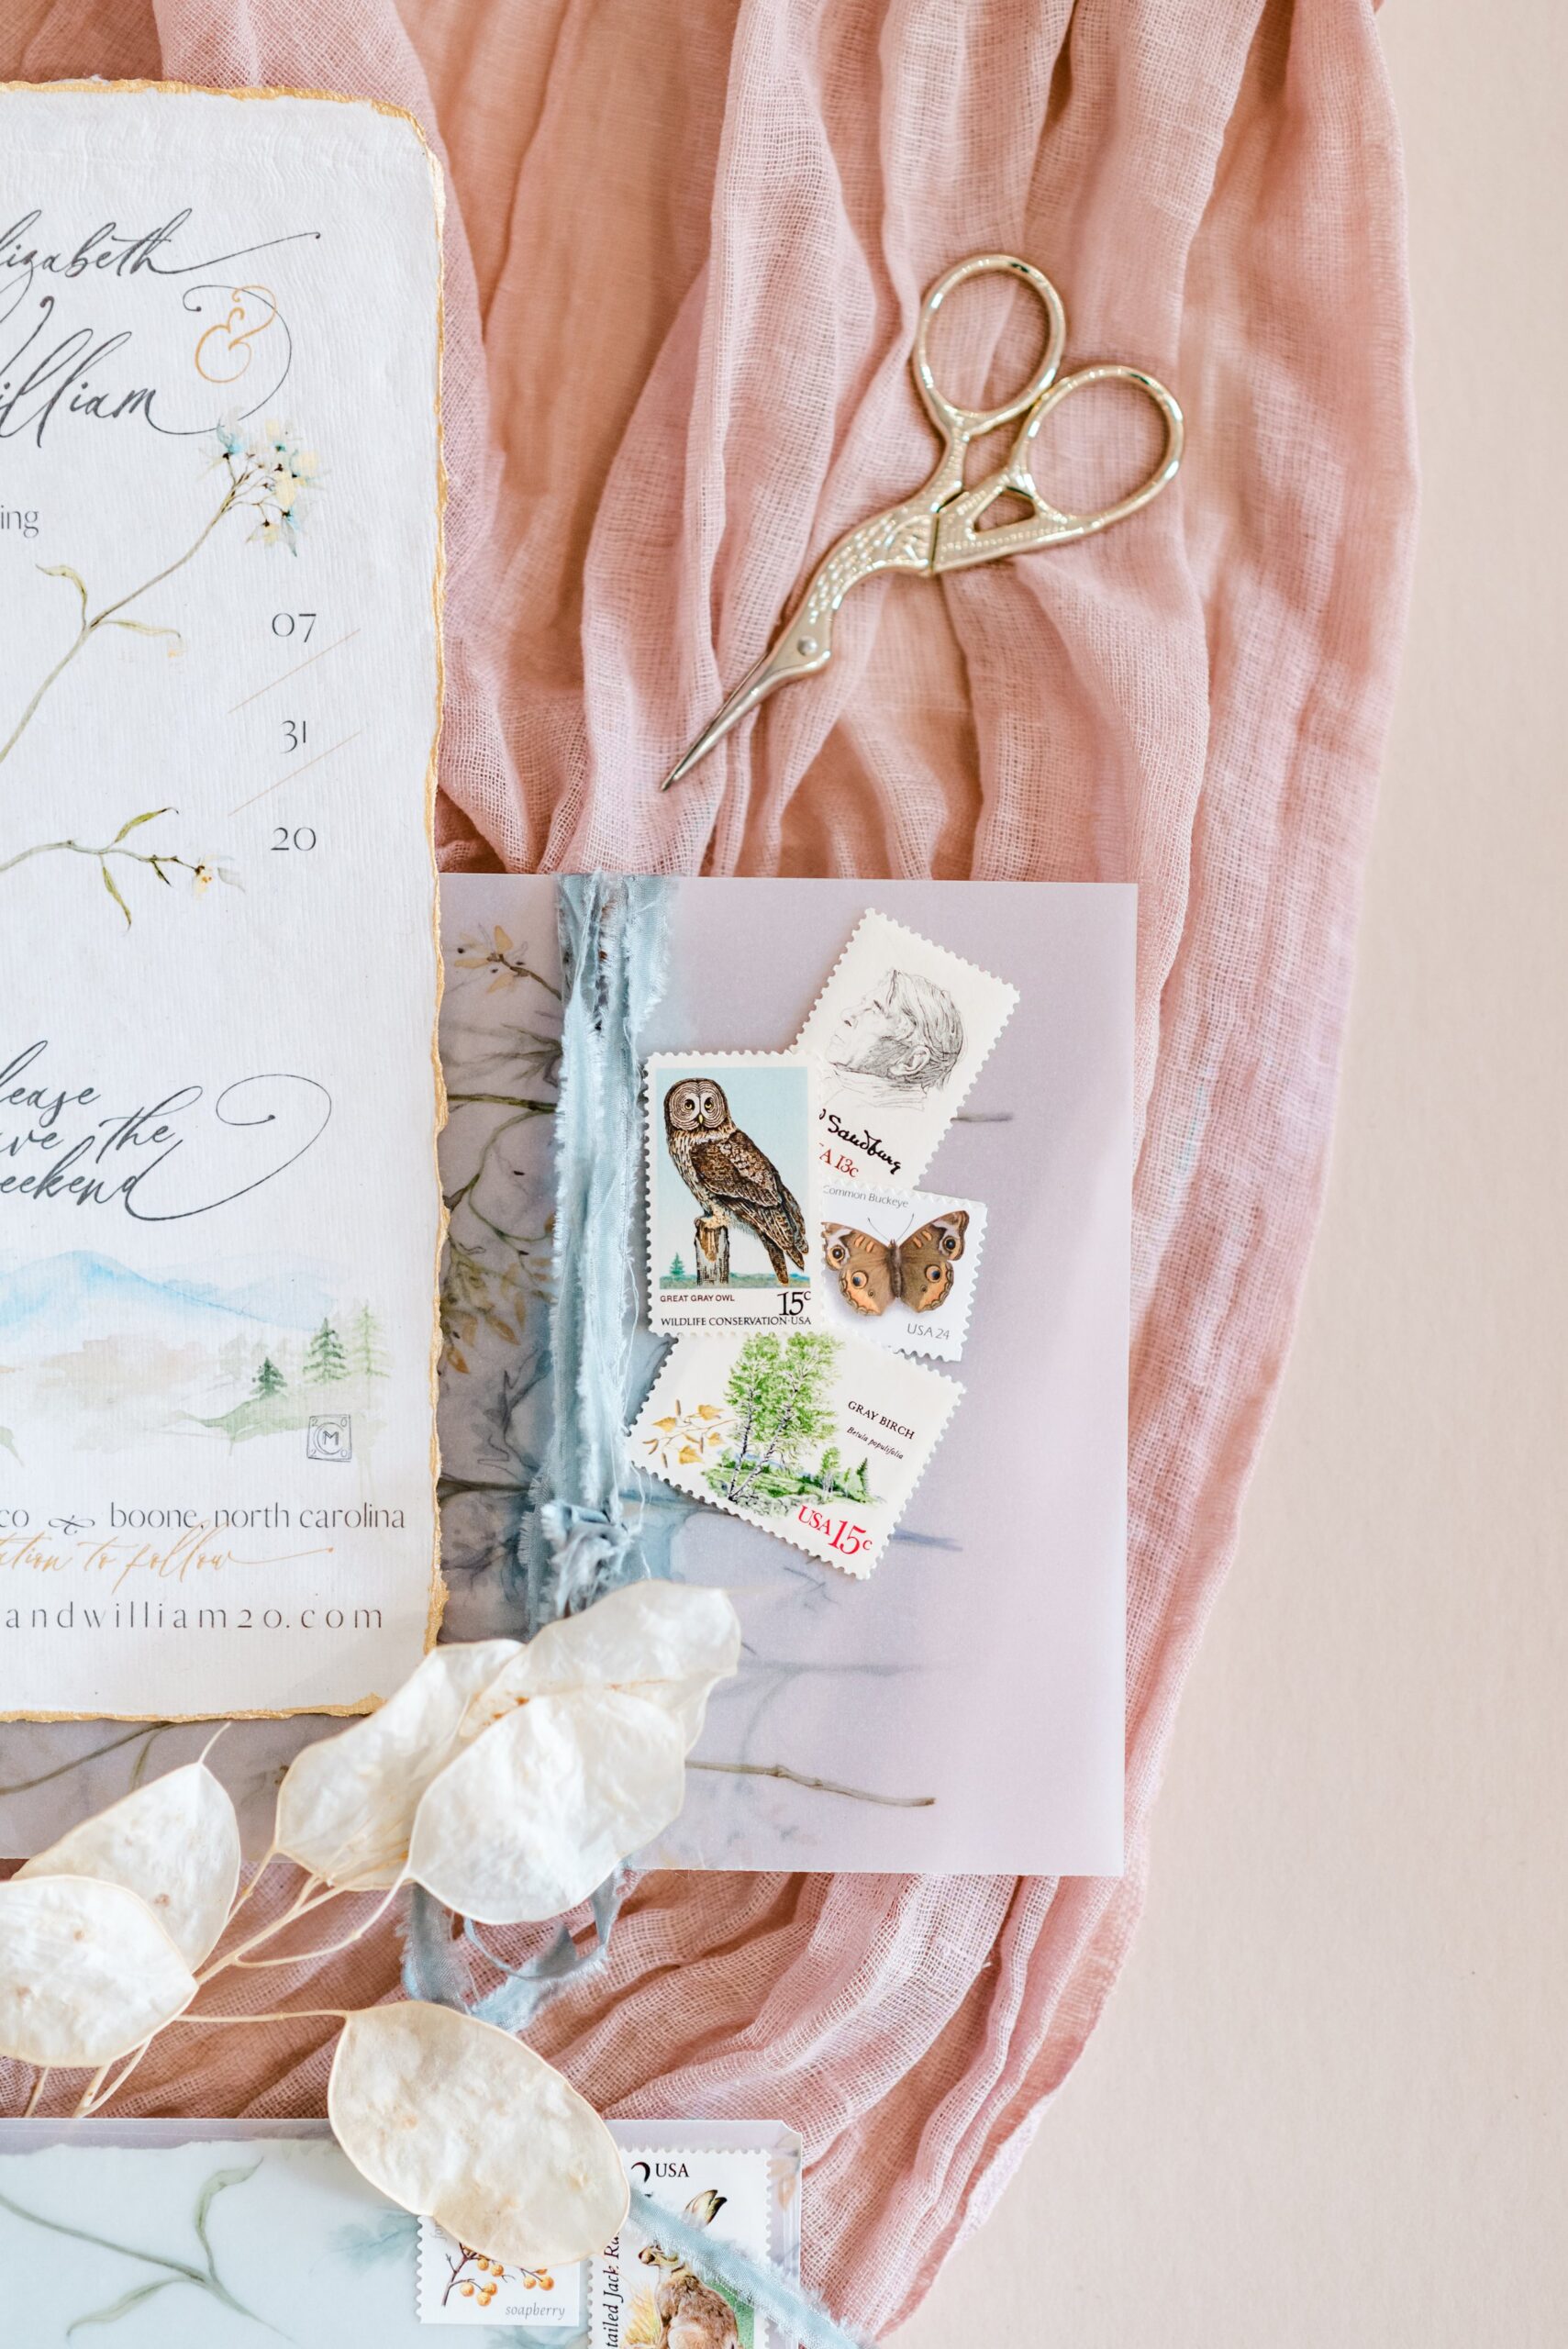 A flatlay on a pink linen with details including stationery, mini gold scissors and vintage stamps featuring wildlife. 